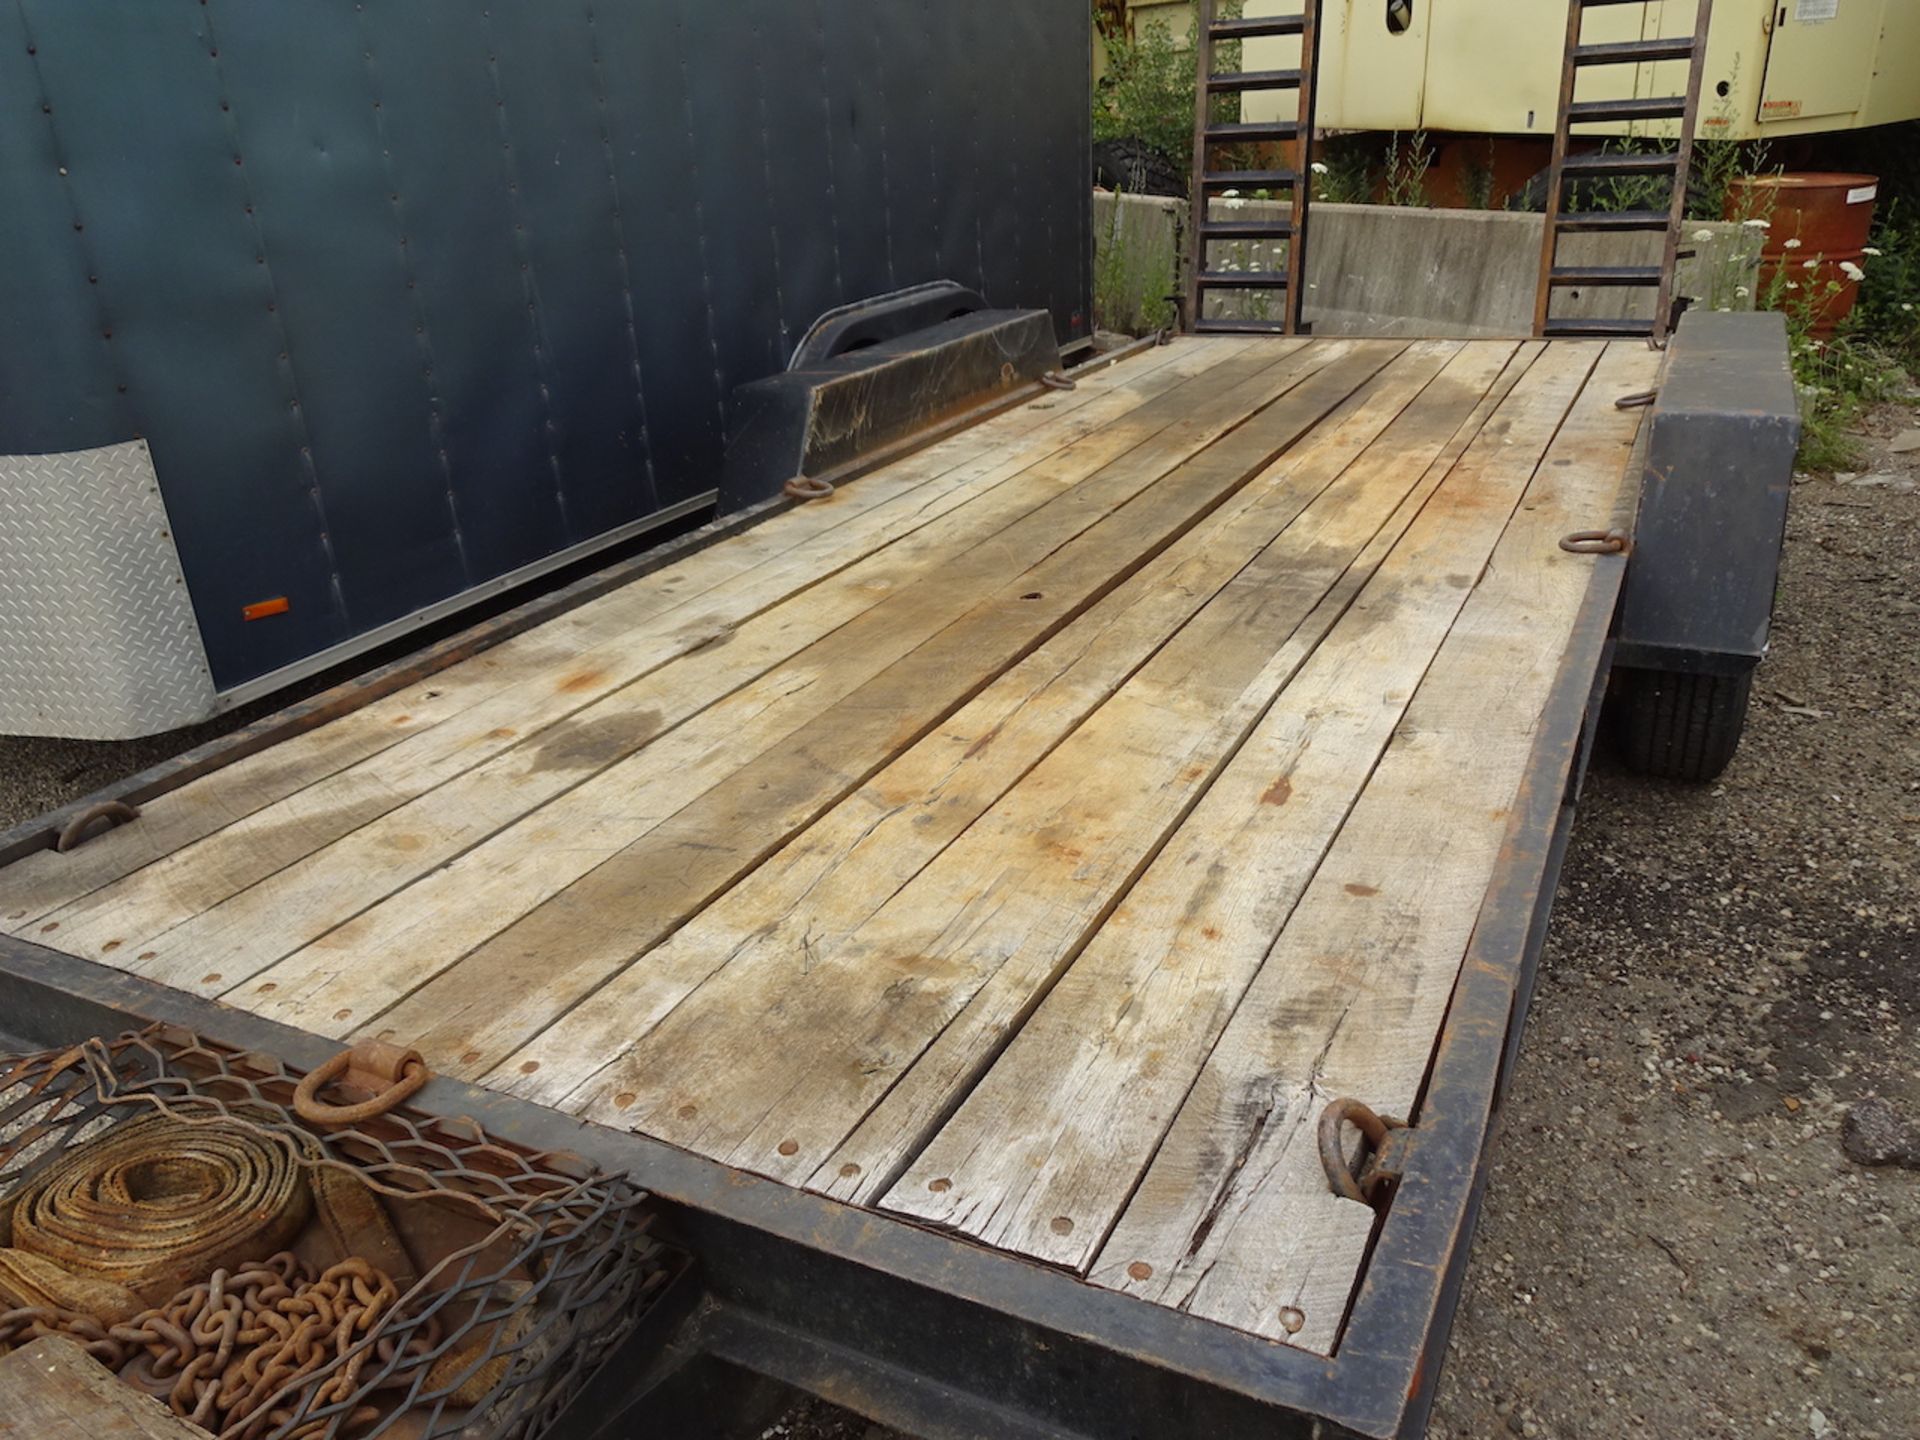 Equipment Trailer, 16 Ft. x 6 Ft. (Approx) - Image 3 of 6